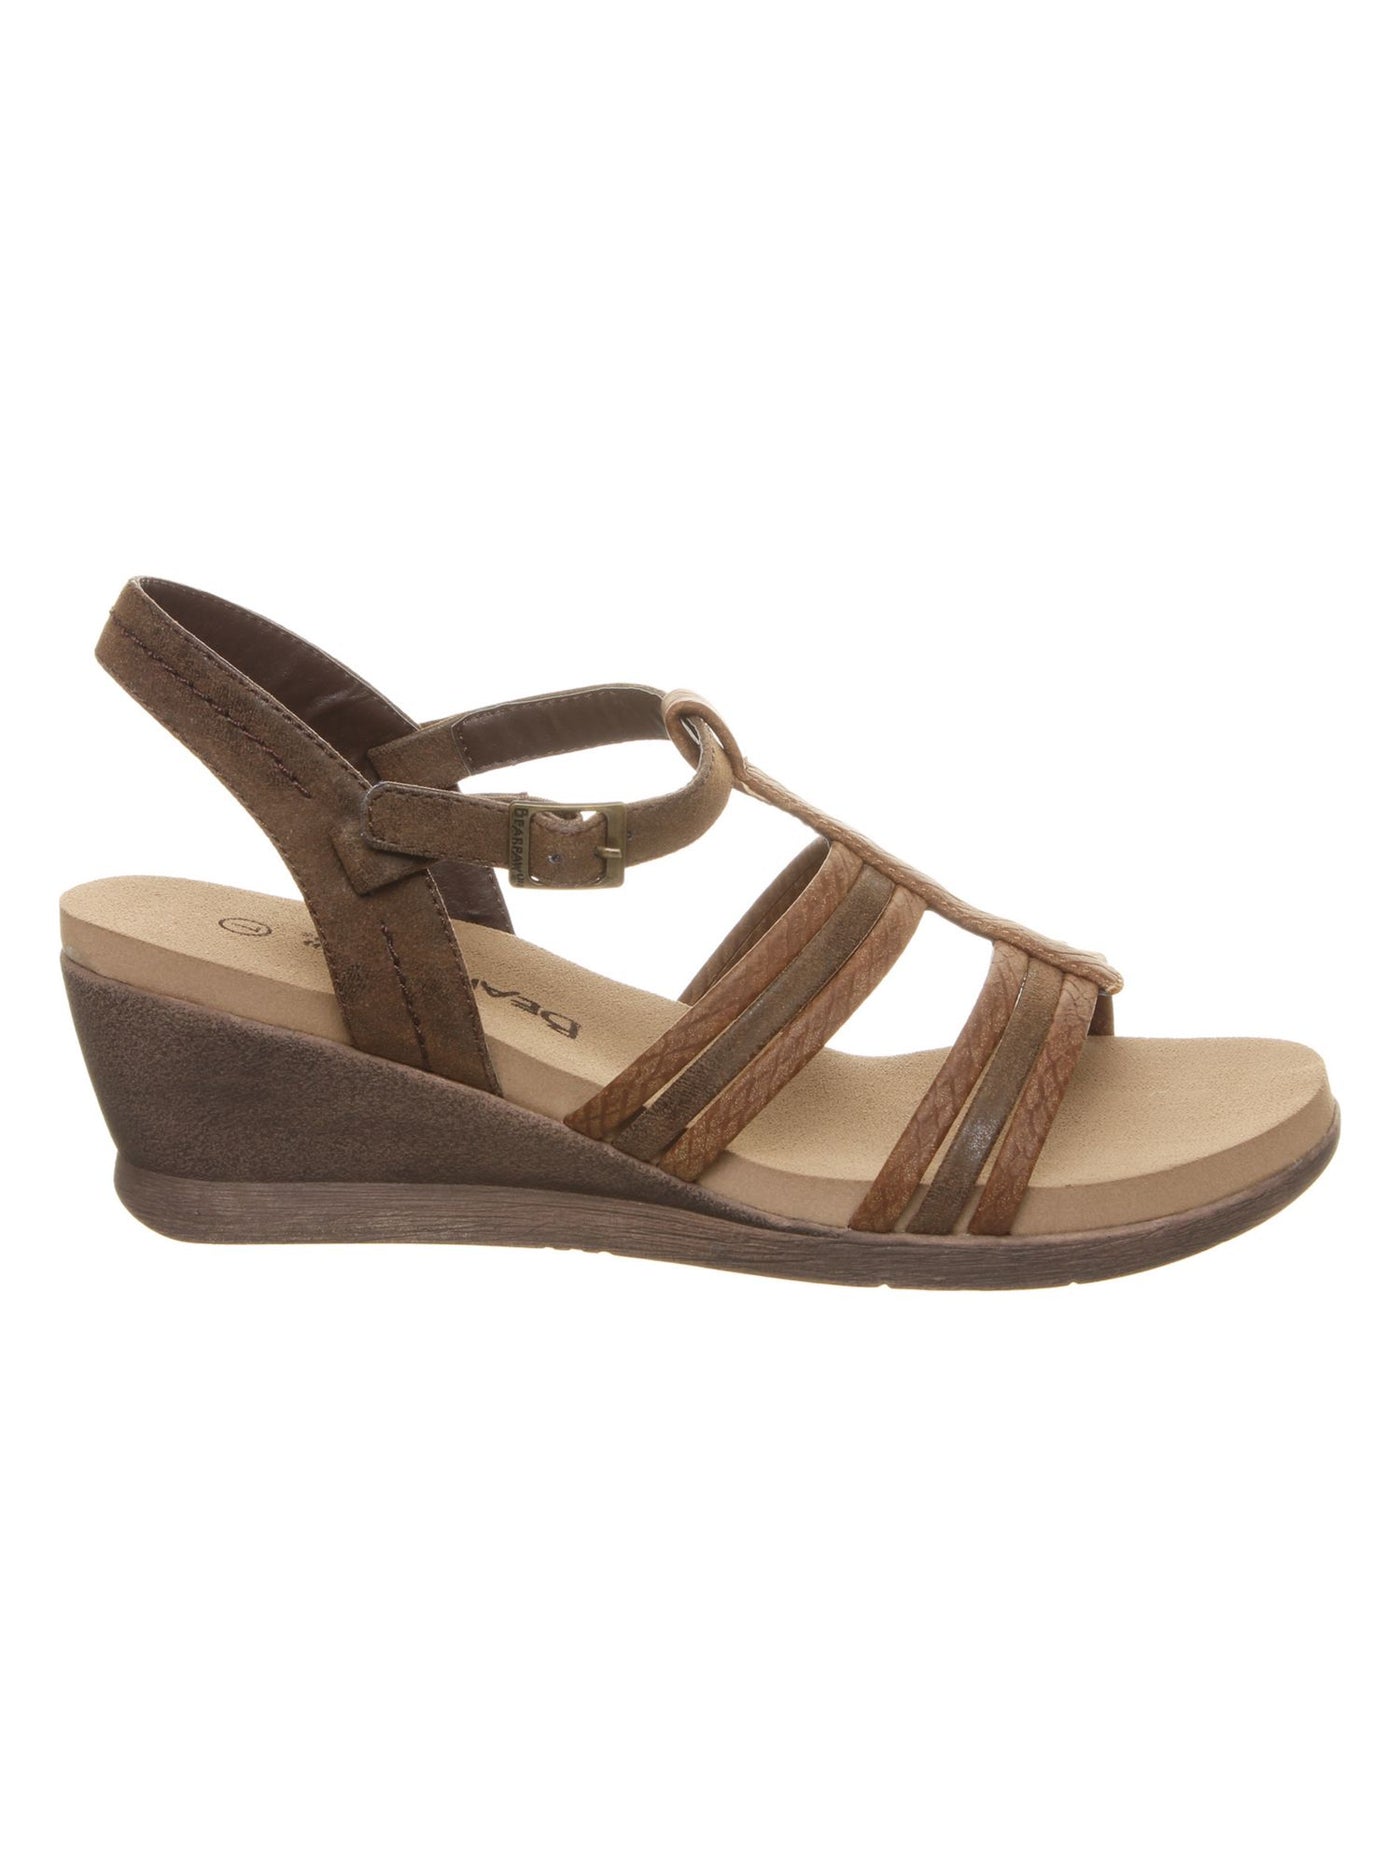 BEAR PAW Womens Brown Snake Comfort 1" Platform Ankle Strap Strappy Viola Wedge Buckle Sandals 7